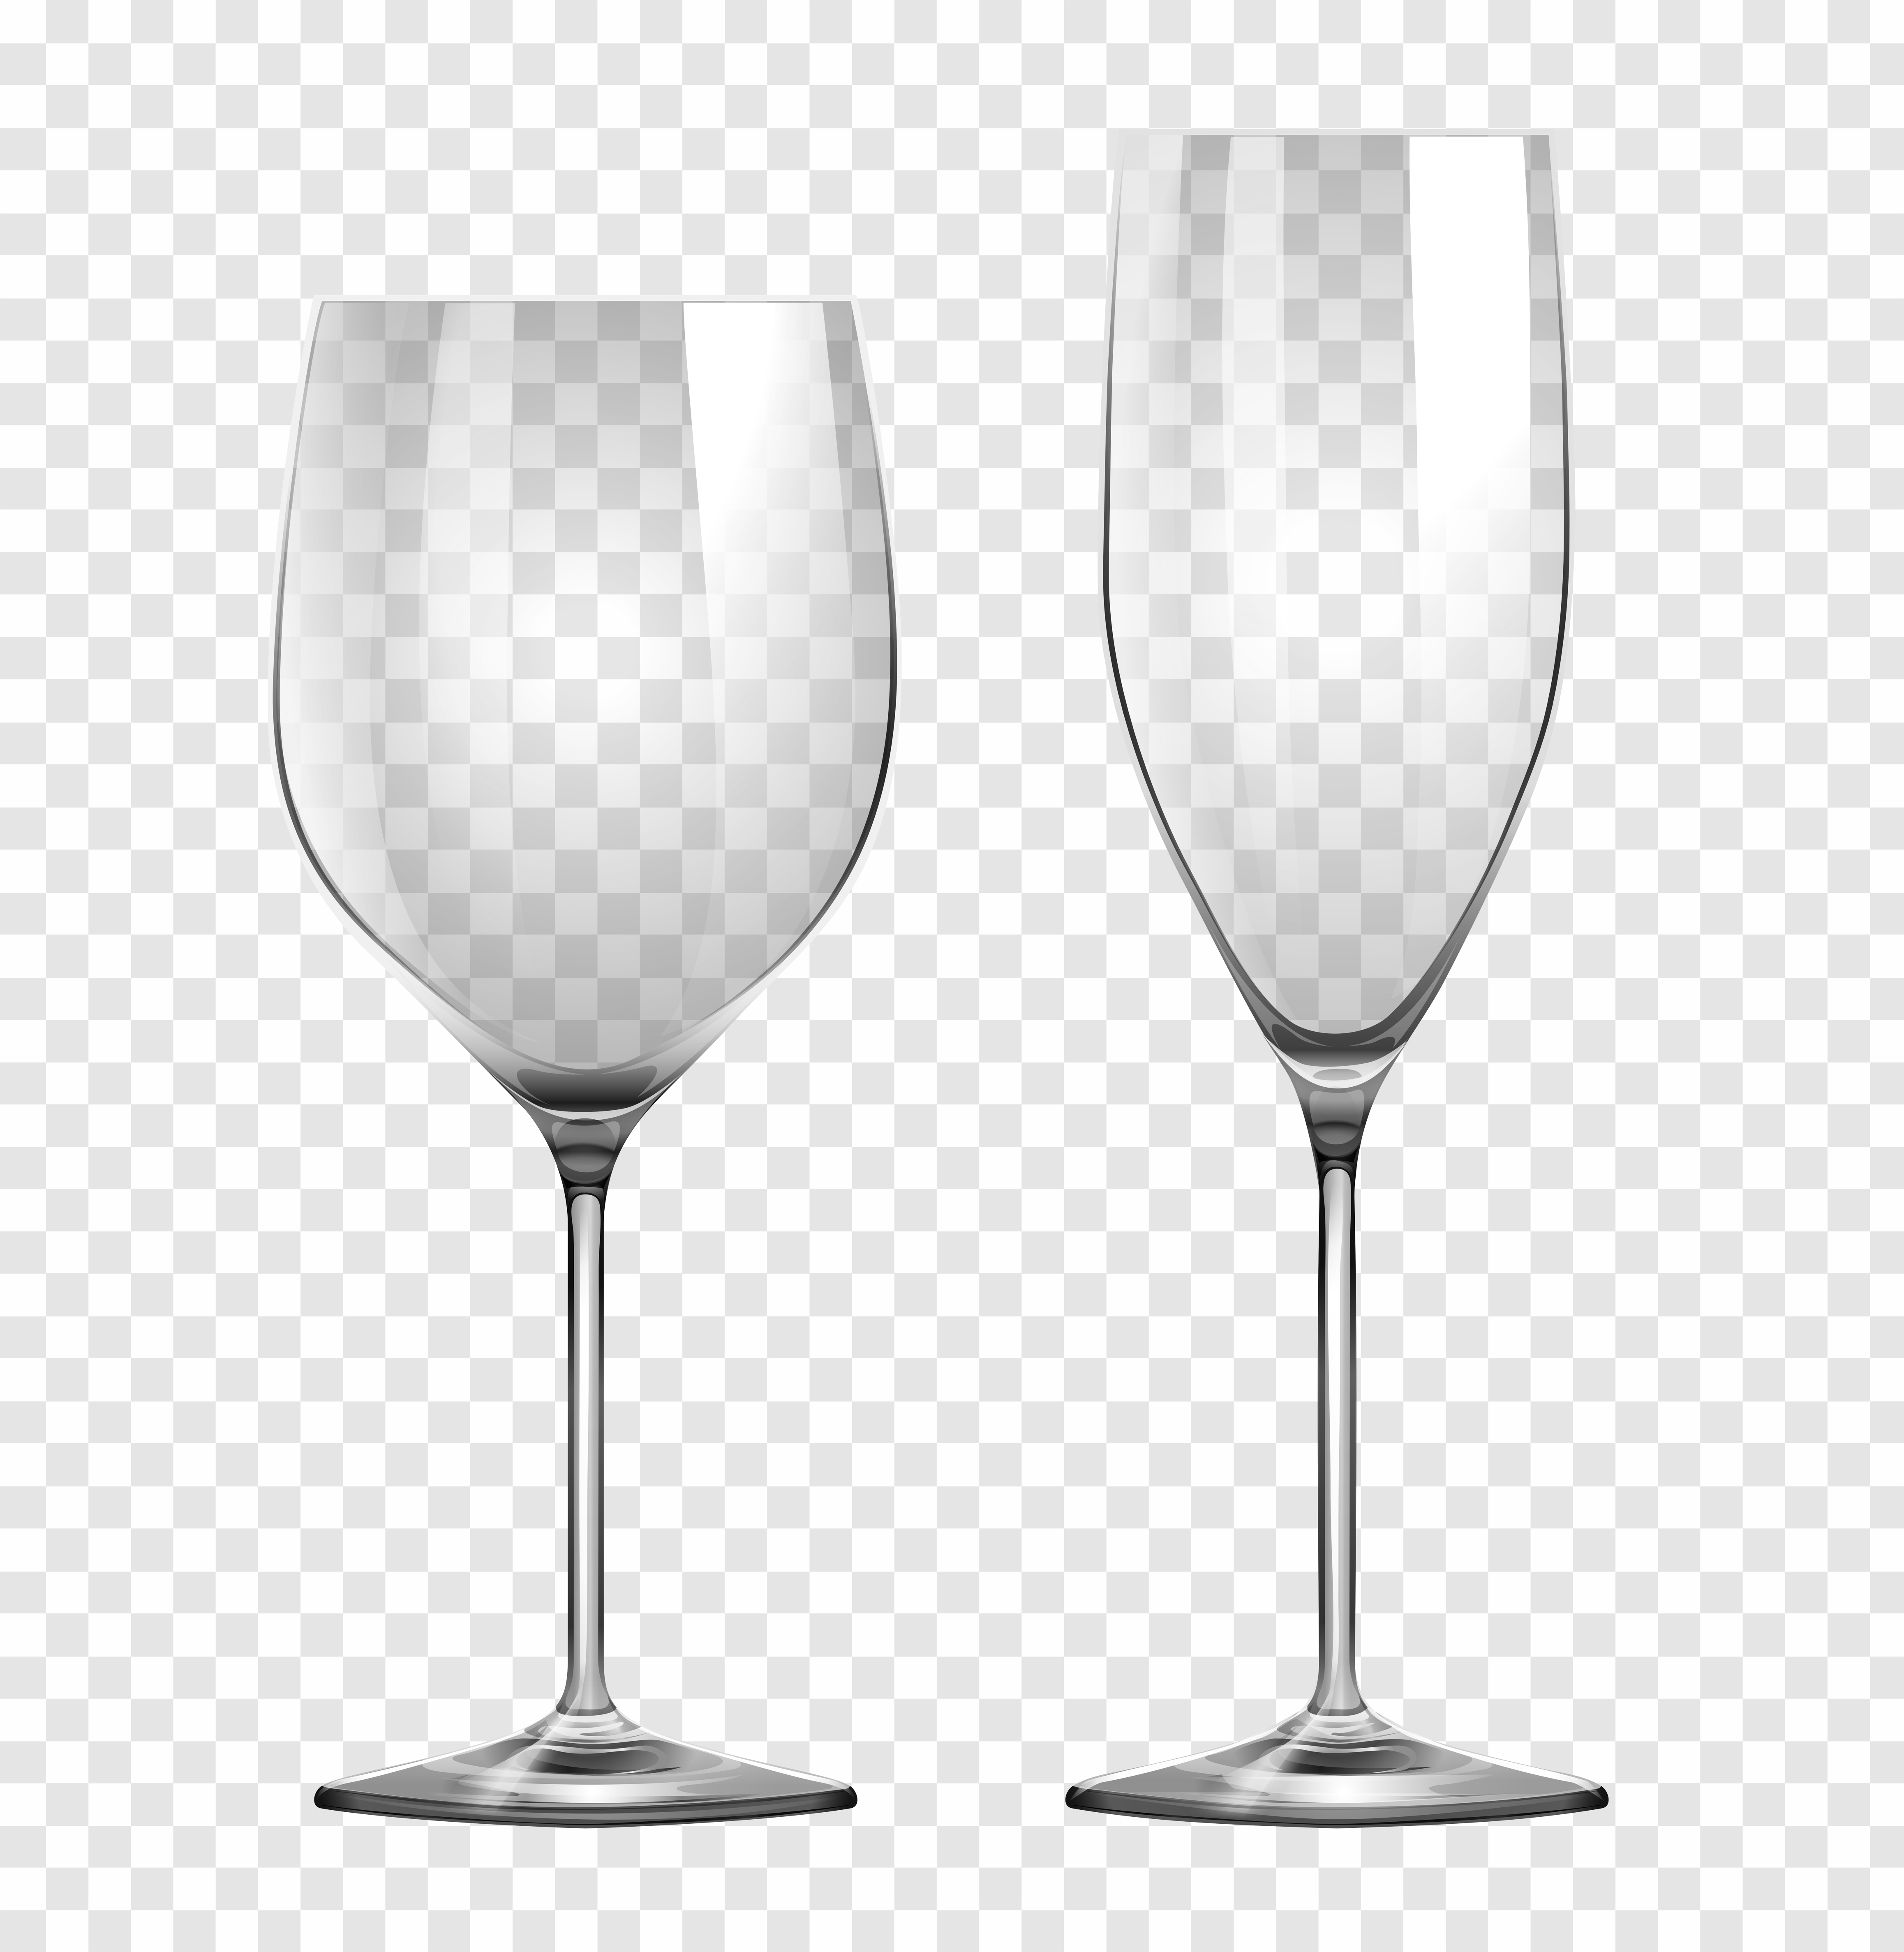 Two types of wine glasses 300825 - Download Free Vectors, Clipart Graphics & Vector Art